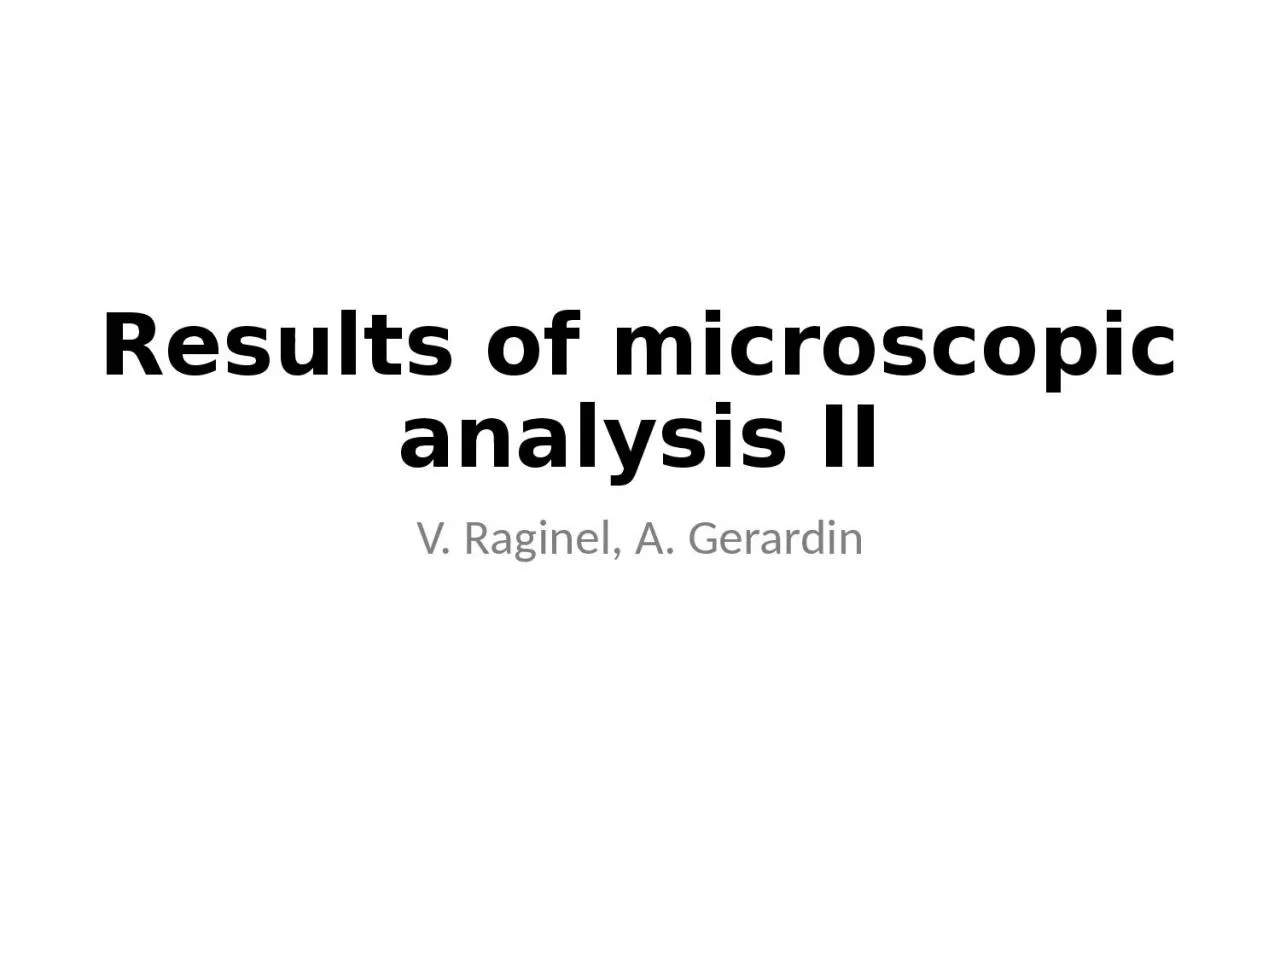 Results of microscopic analysis II